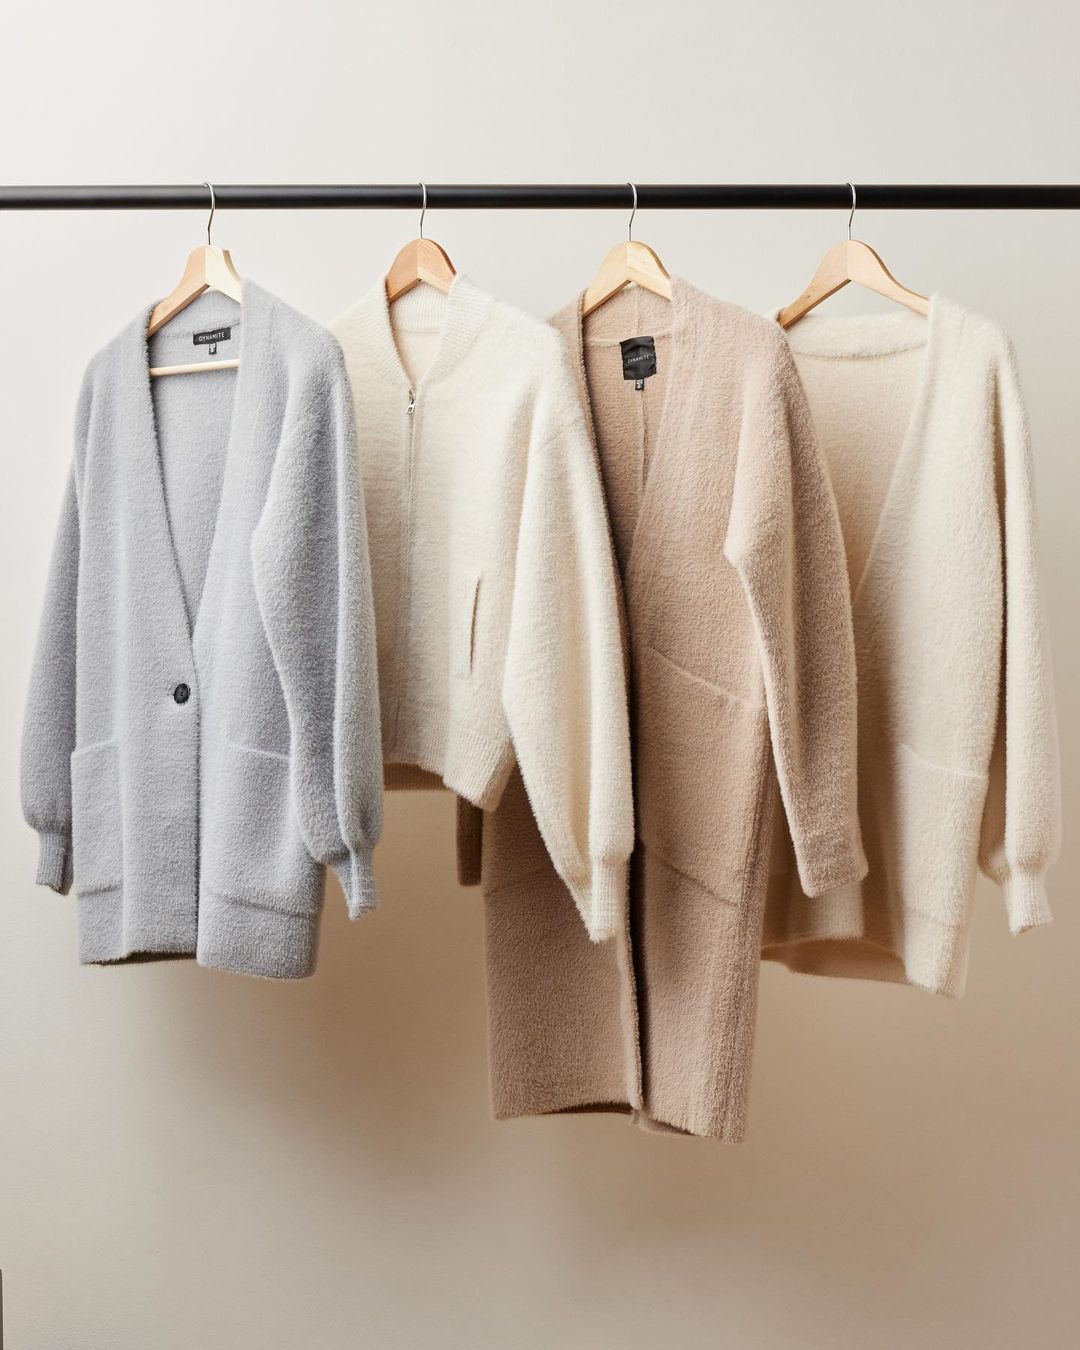 Four neutral coloured cardigans with wooden hangers hanging on a rack in front of a white background.